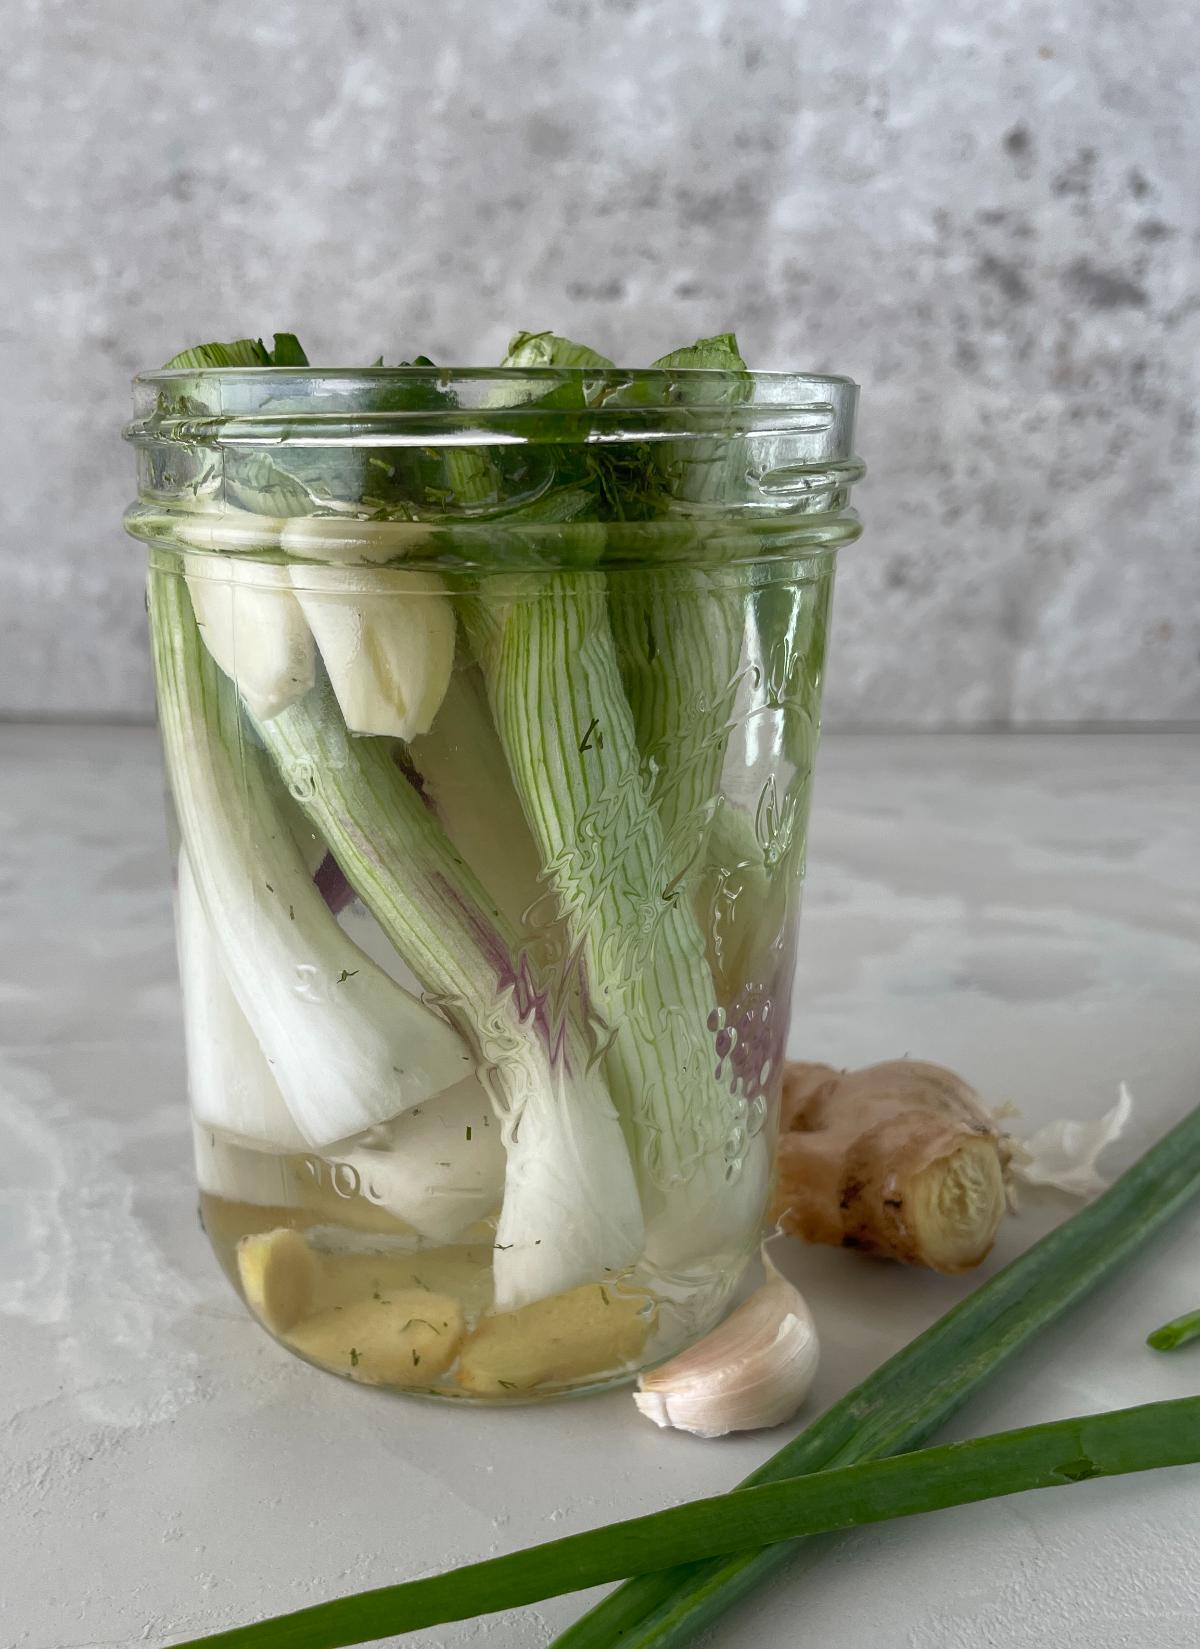 pickled green onions in a jar